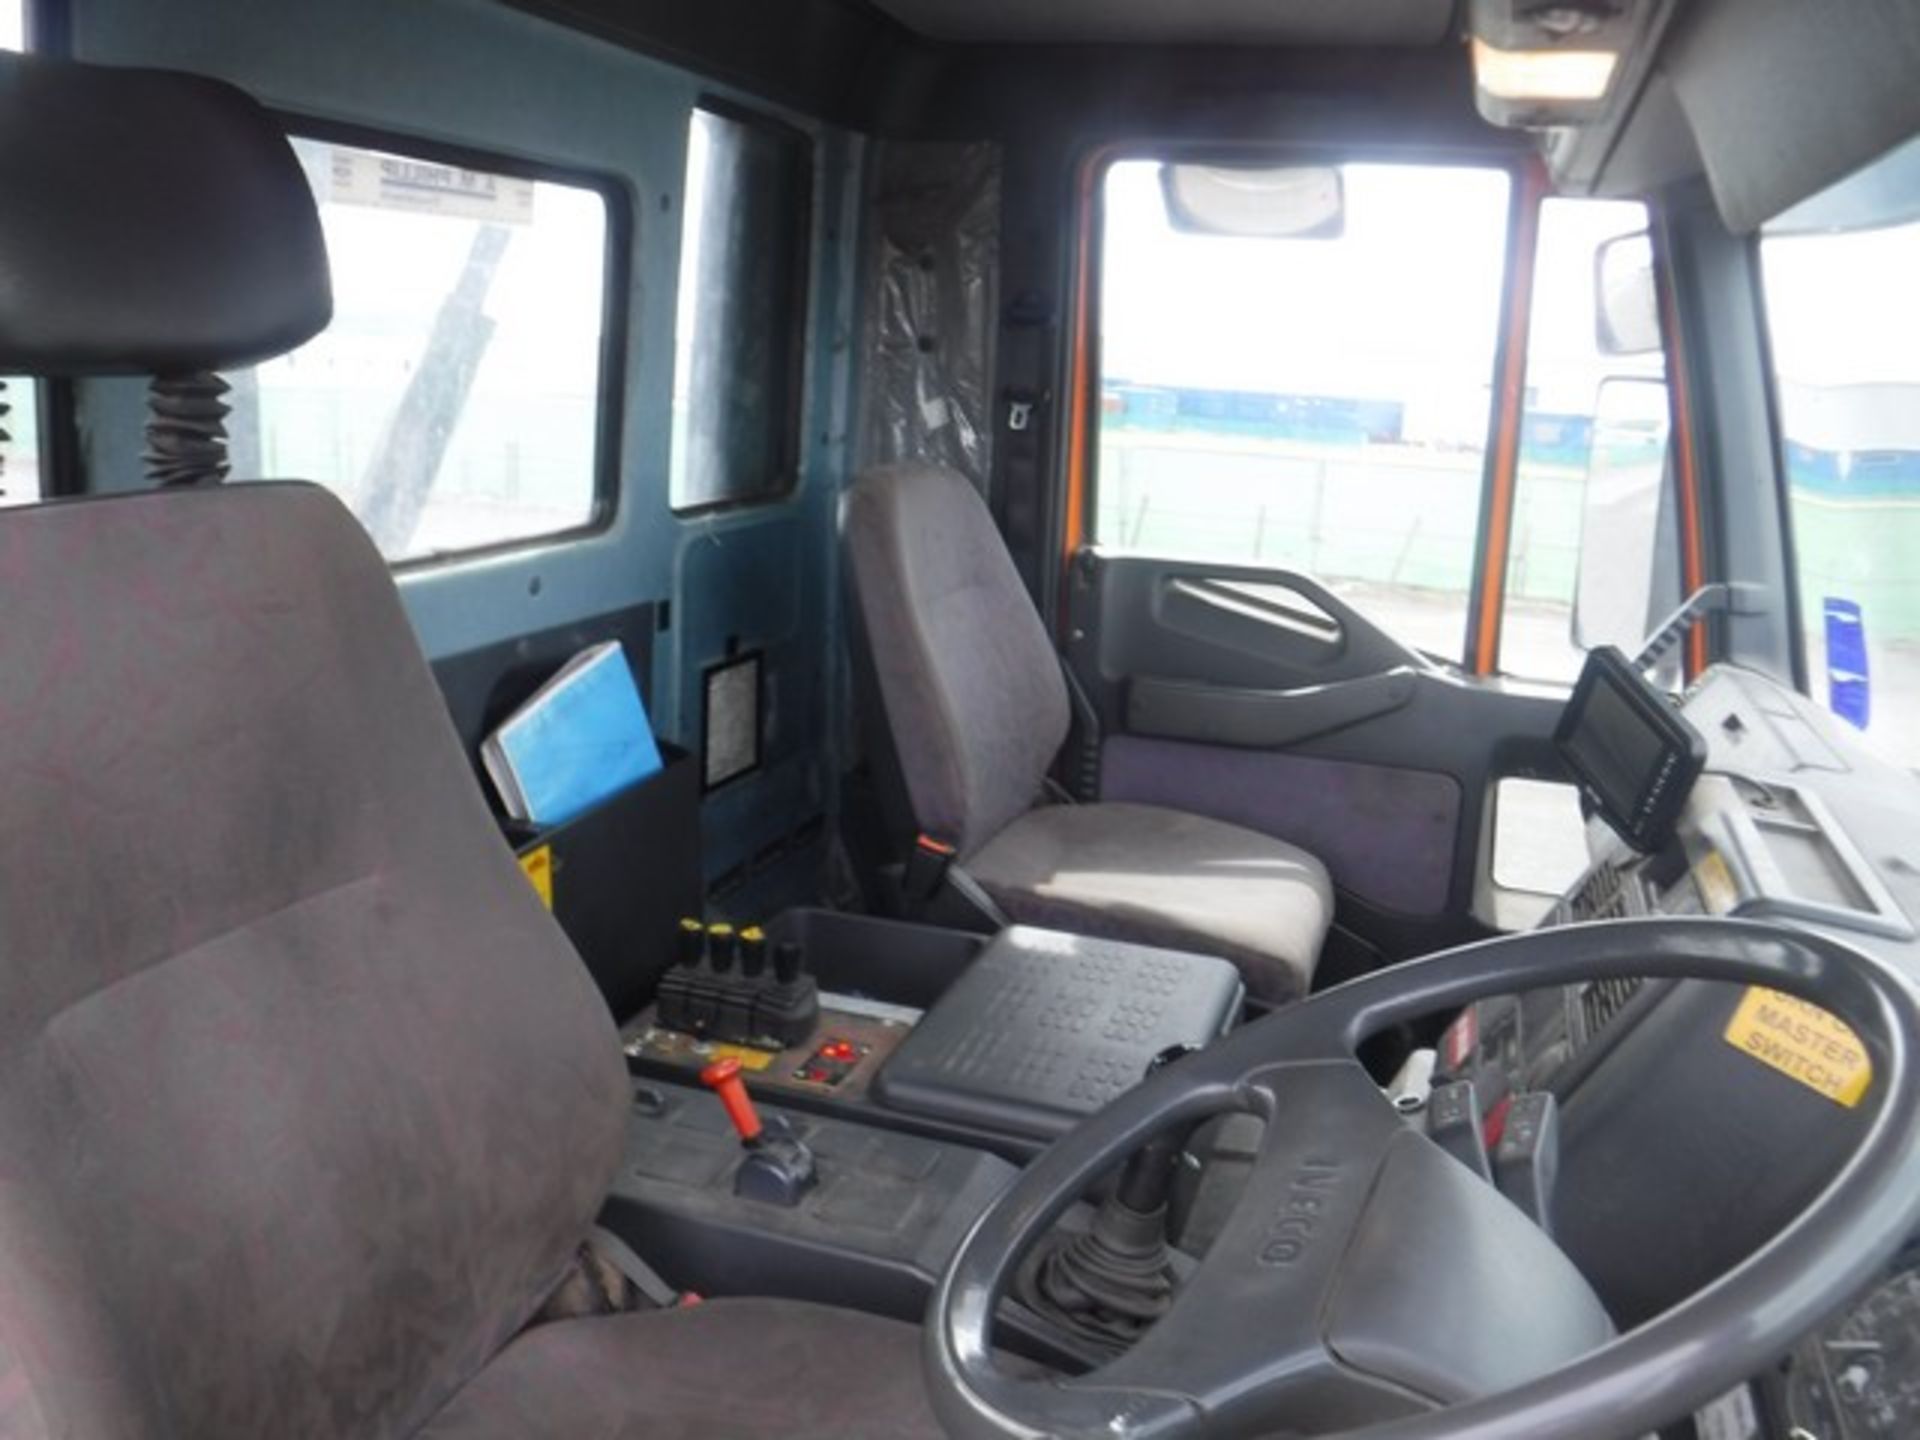 IVECO DAILY 50C15 3.5WB - 7790cc - Image 15 of 41